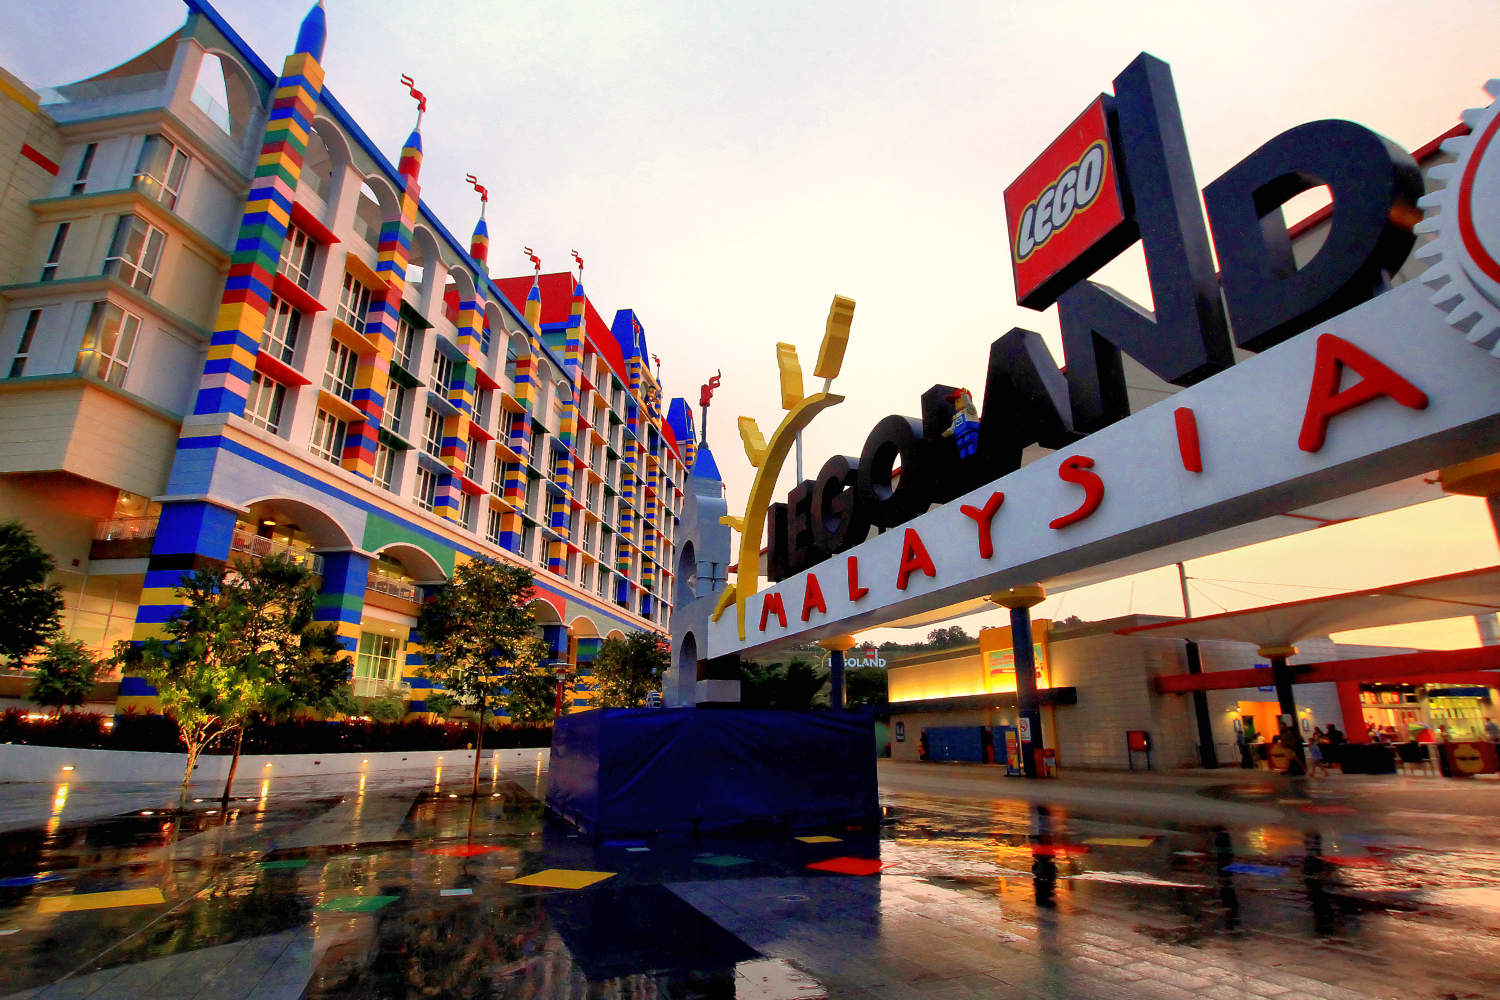 How to travel by bus to Legoland from Singapore